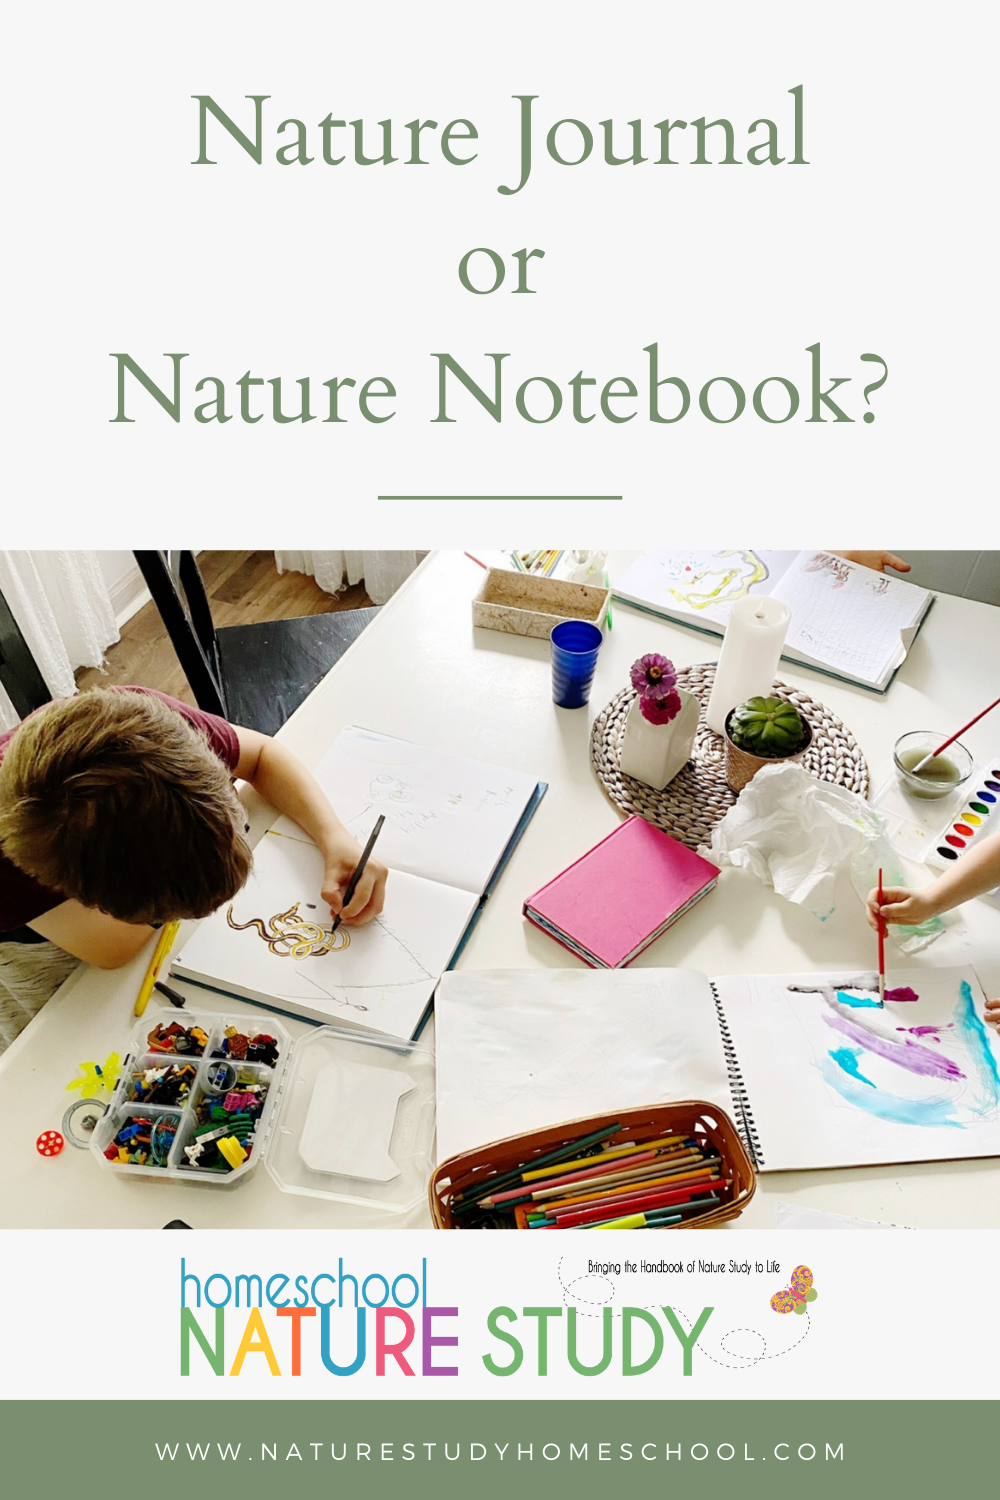 Should you have a homeschool nature journal or a nature notebook? What is the difference between the two? We answer this question.